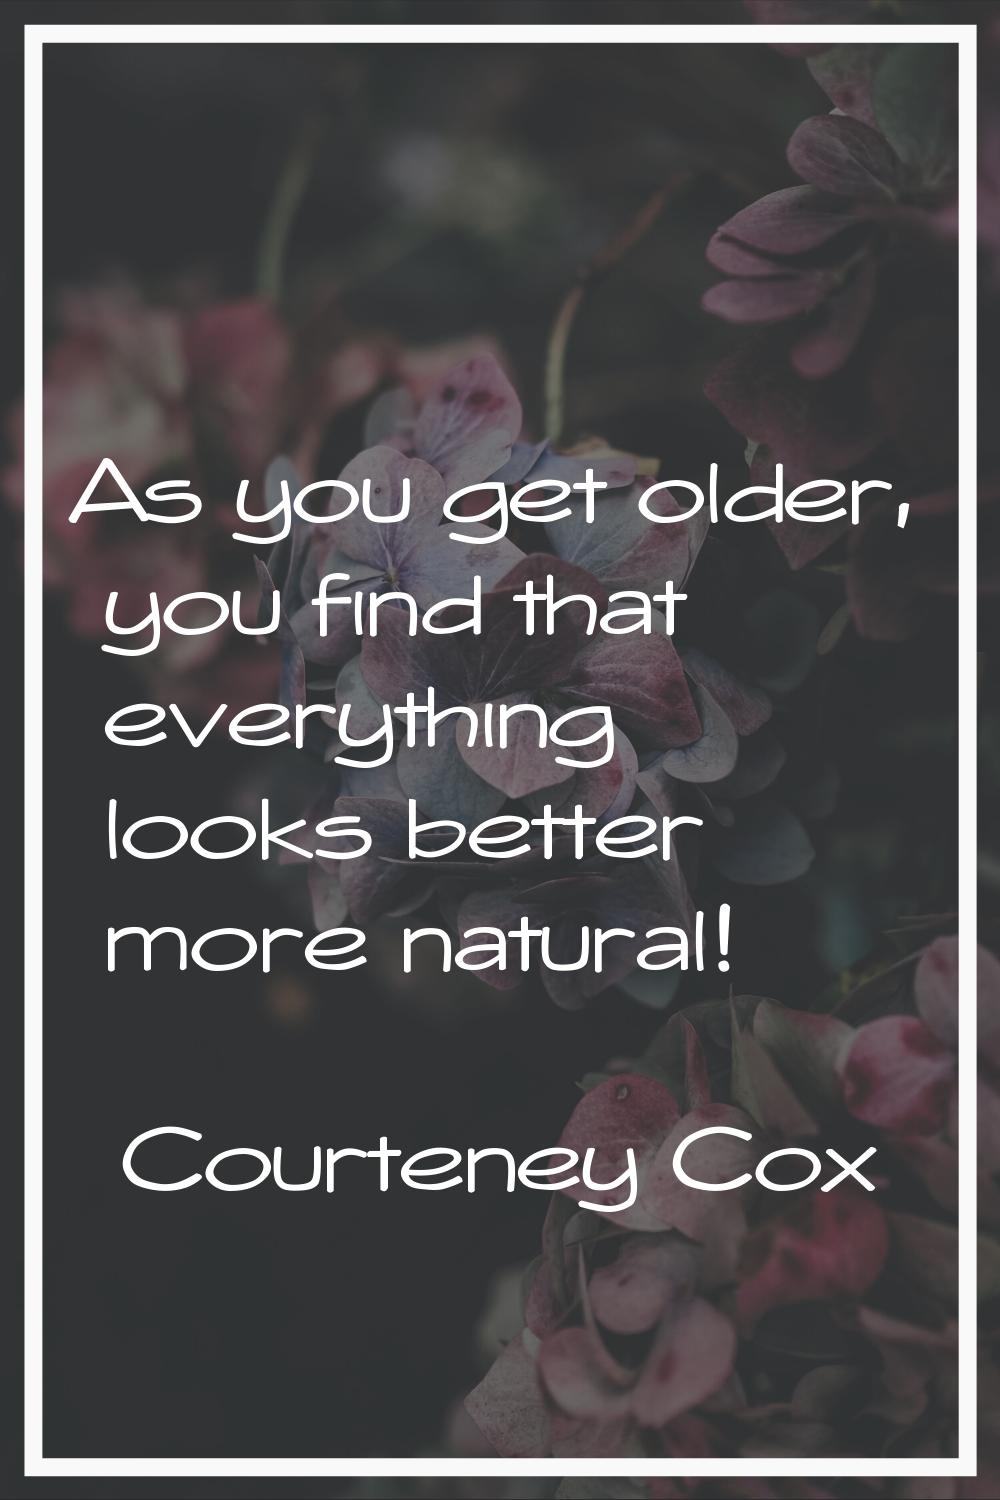 As you get older, you find that everything looks better more natural!